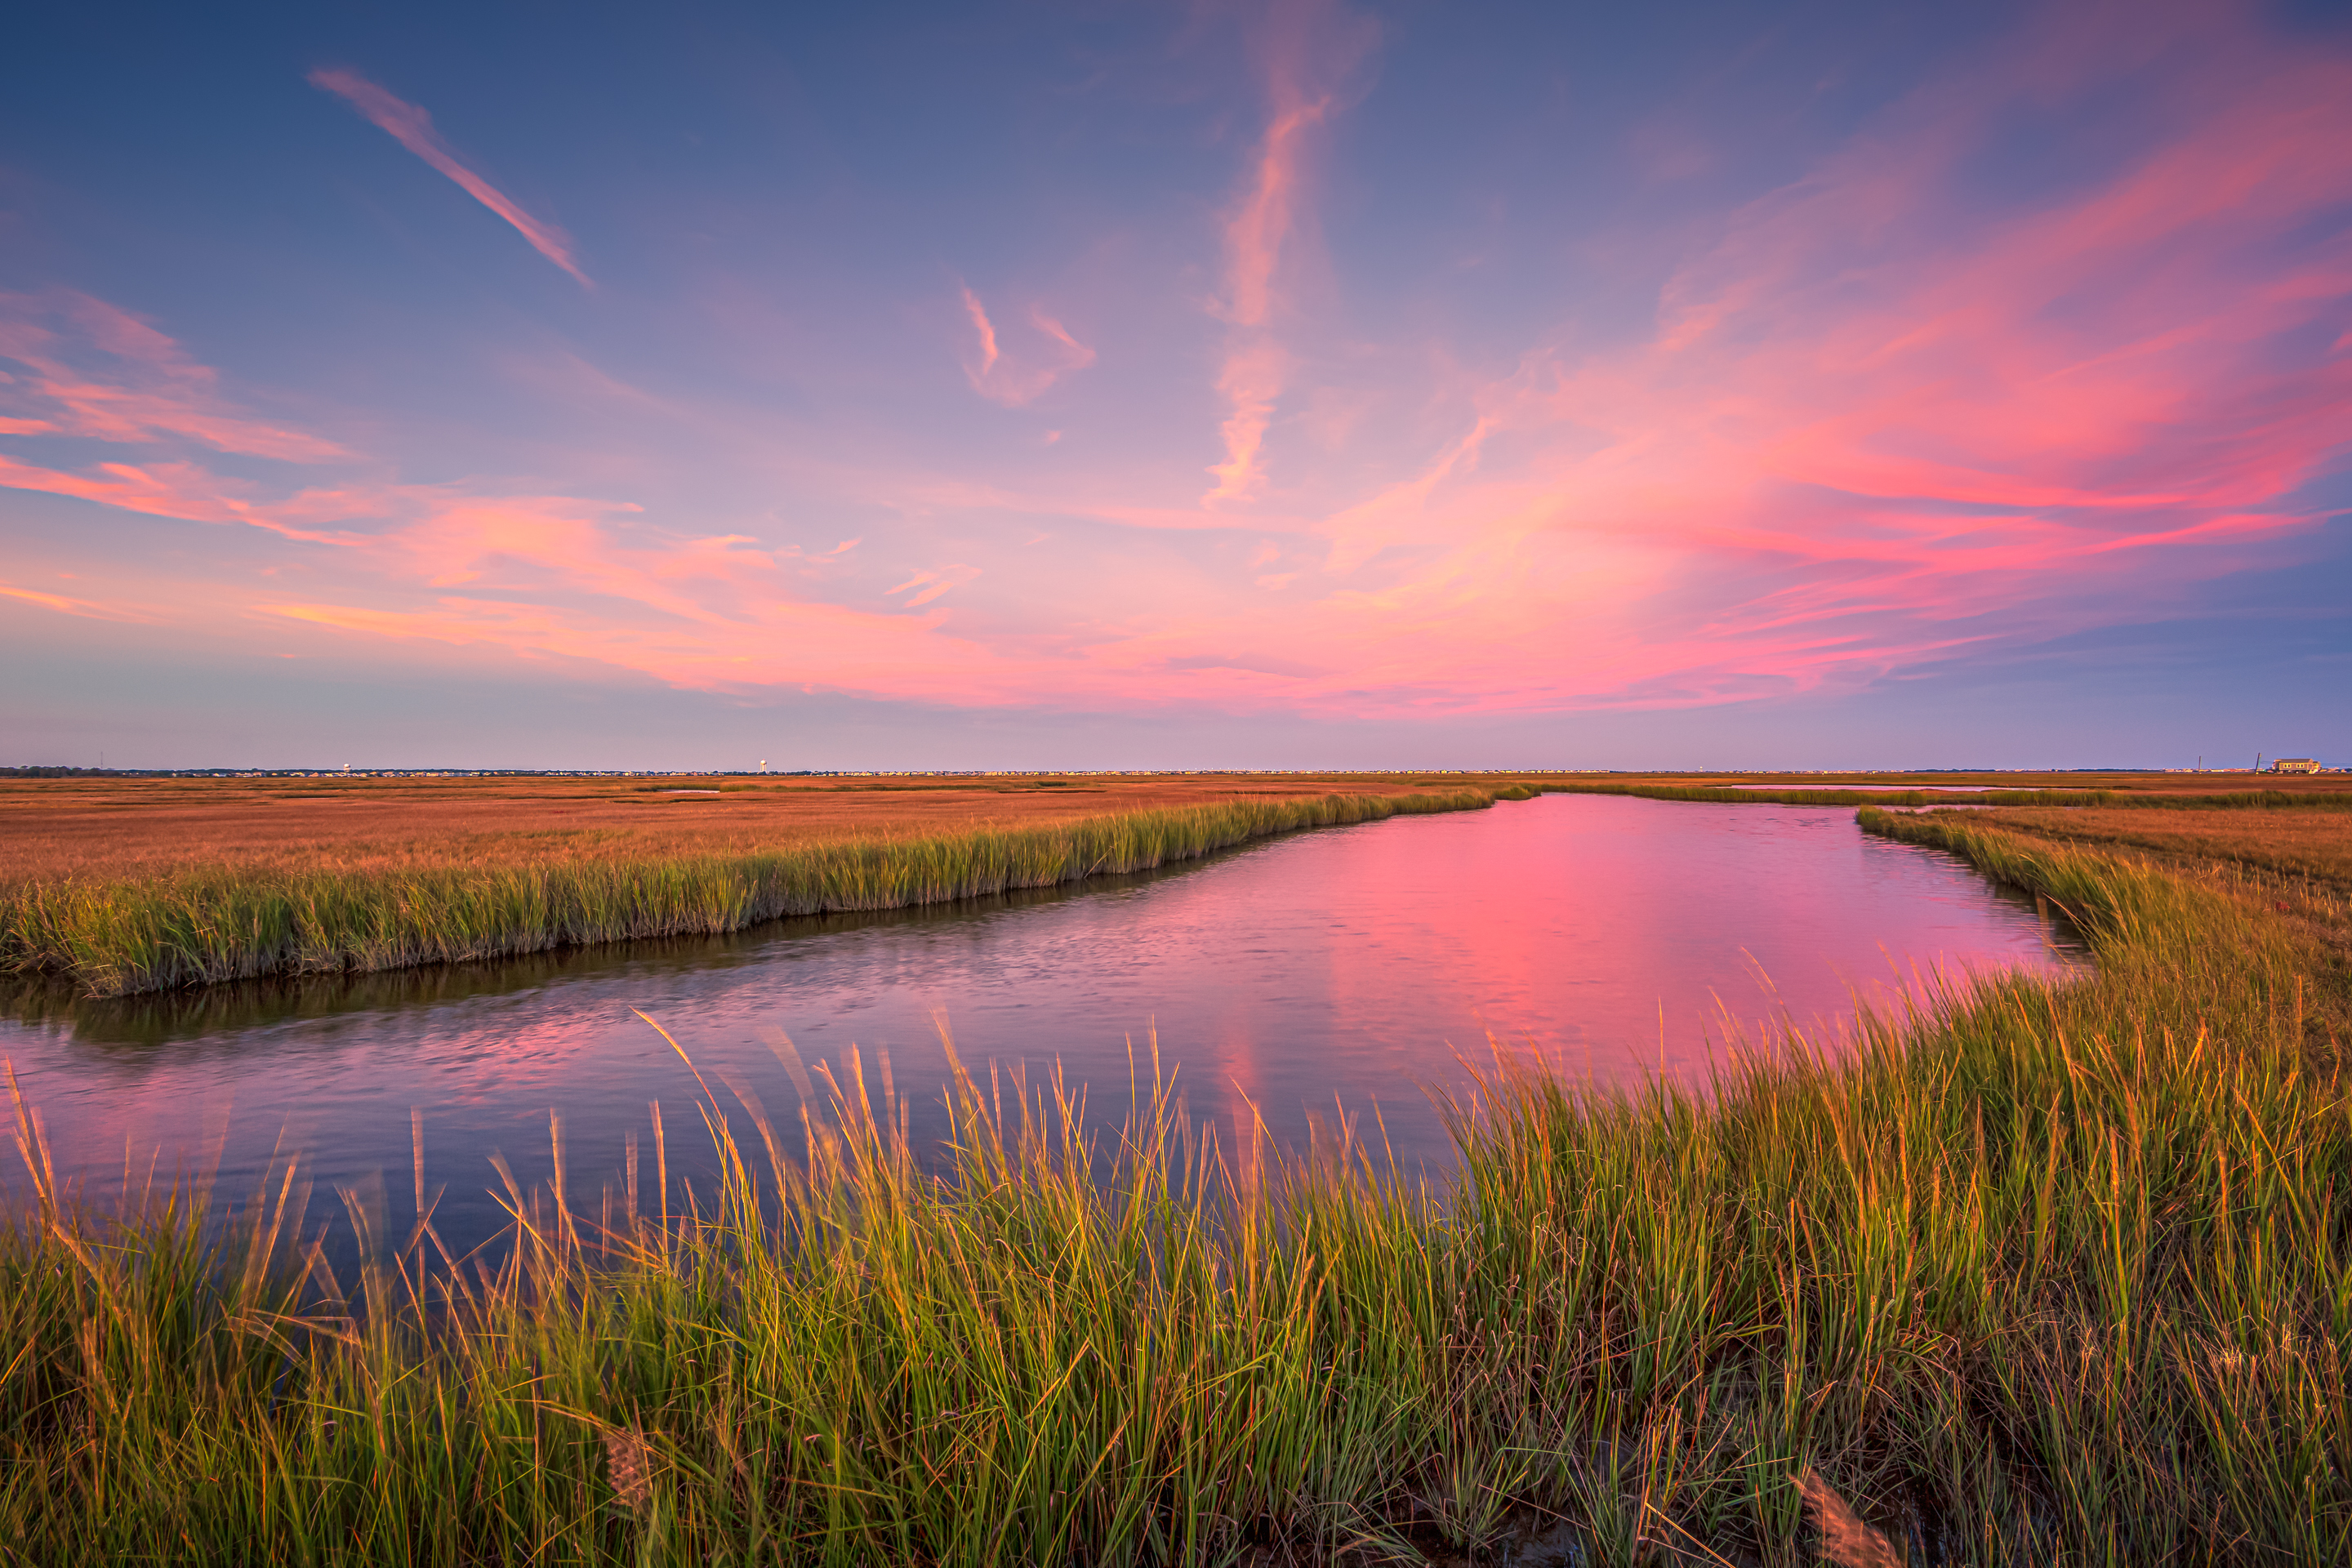 14mm wide angle sunset photo facing east over the salt marsh under pastel colored cotton candy clouds.